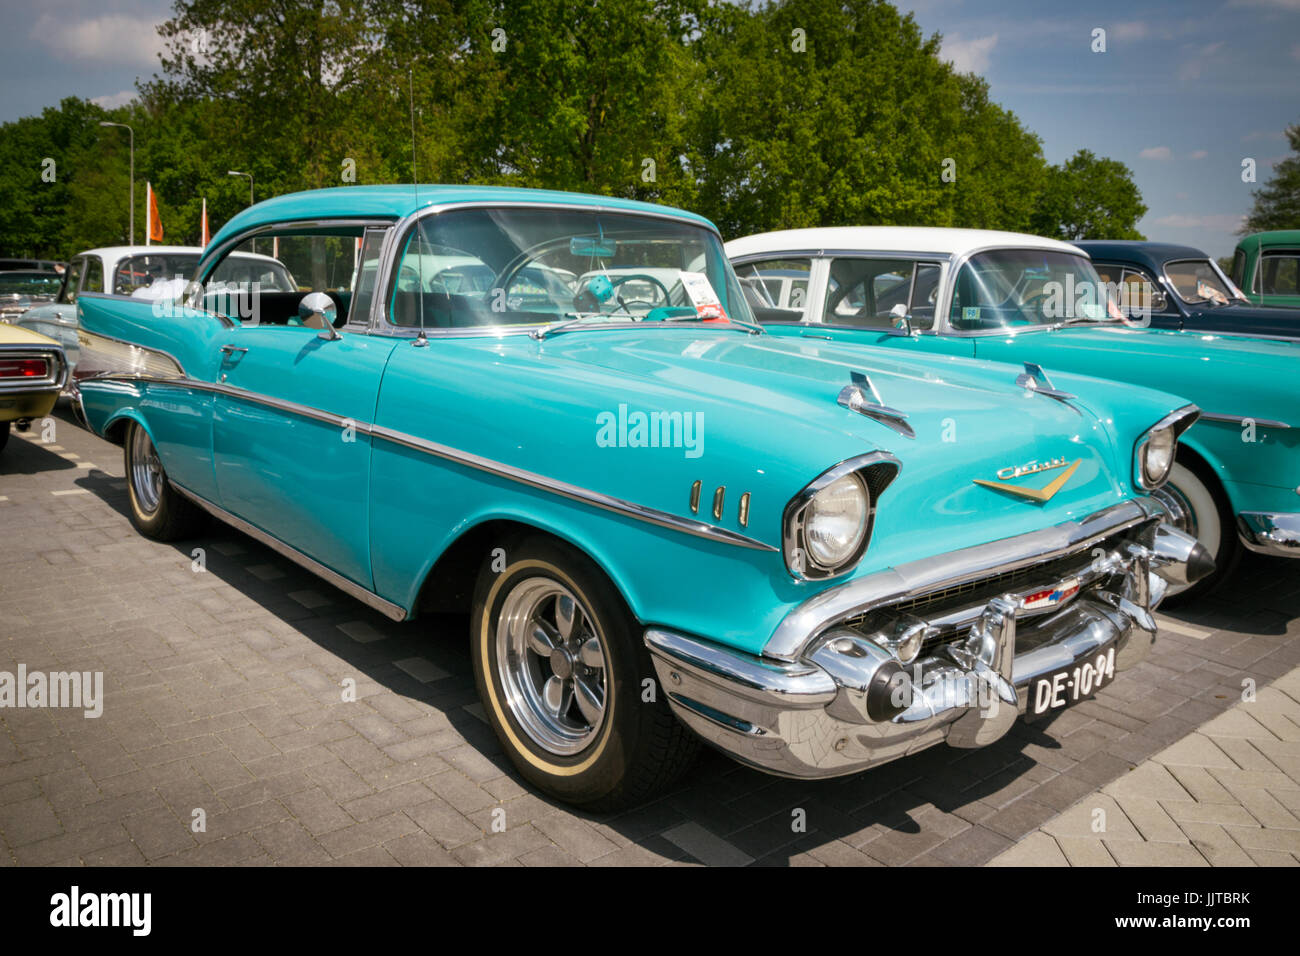 DEN BOSCH, THE NETHERLANDS - MAY 10, 2015: Turquoise 1957 Chevrolet Bel Air classic car. Stock Photo